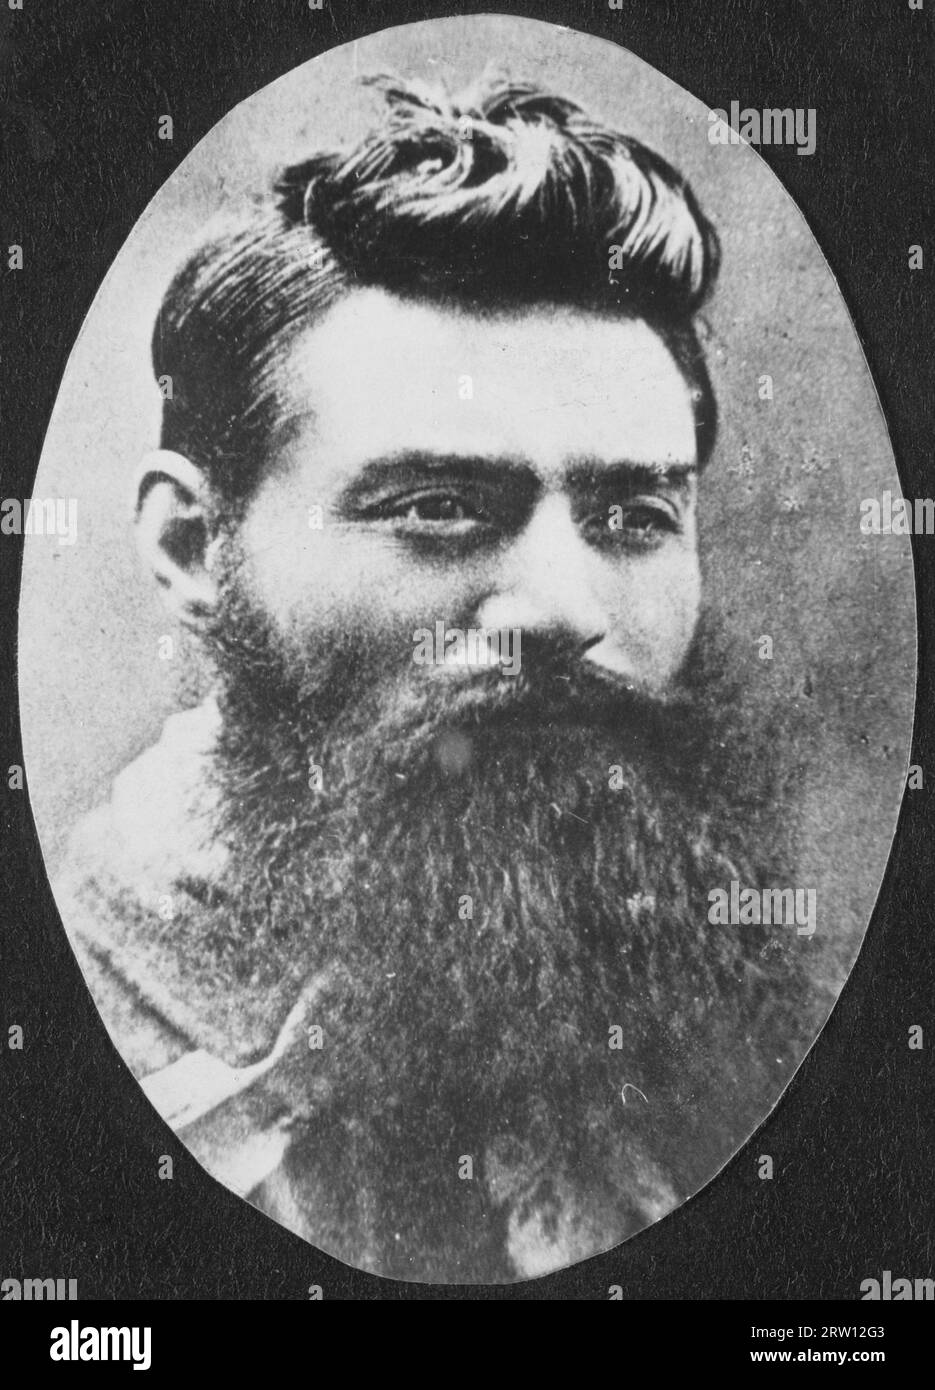 Portrait of bushranger Ned Kelly the day before he was hanged on November 11, 1880. by photographer Charles Nettleton.   Edward Kelly (December 1854 – 11 November 1880) was an Australian bushranger, outlaw, gang leader and convicted police-murderer. One of the last bushrangers, he is known for wearing a suit of bulletproof armour during his final shootout with the police. Stock Photo